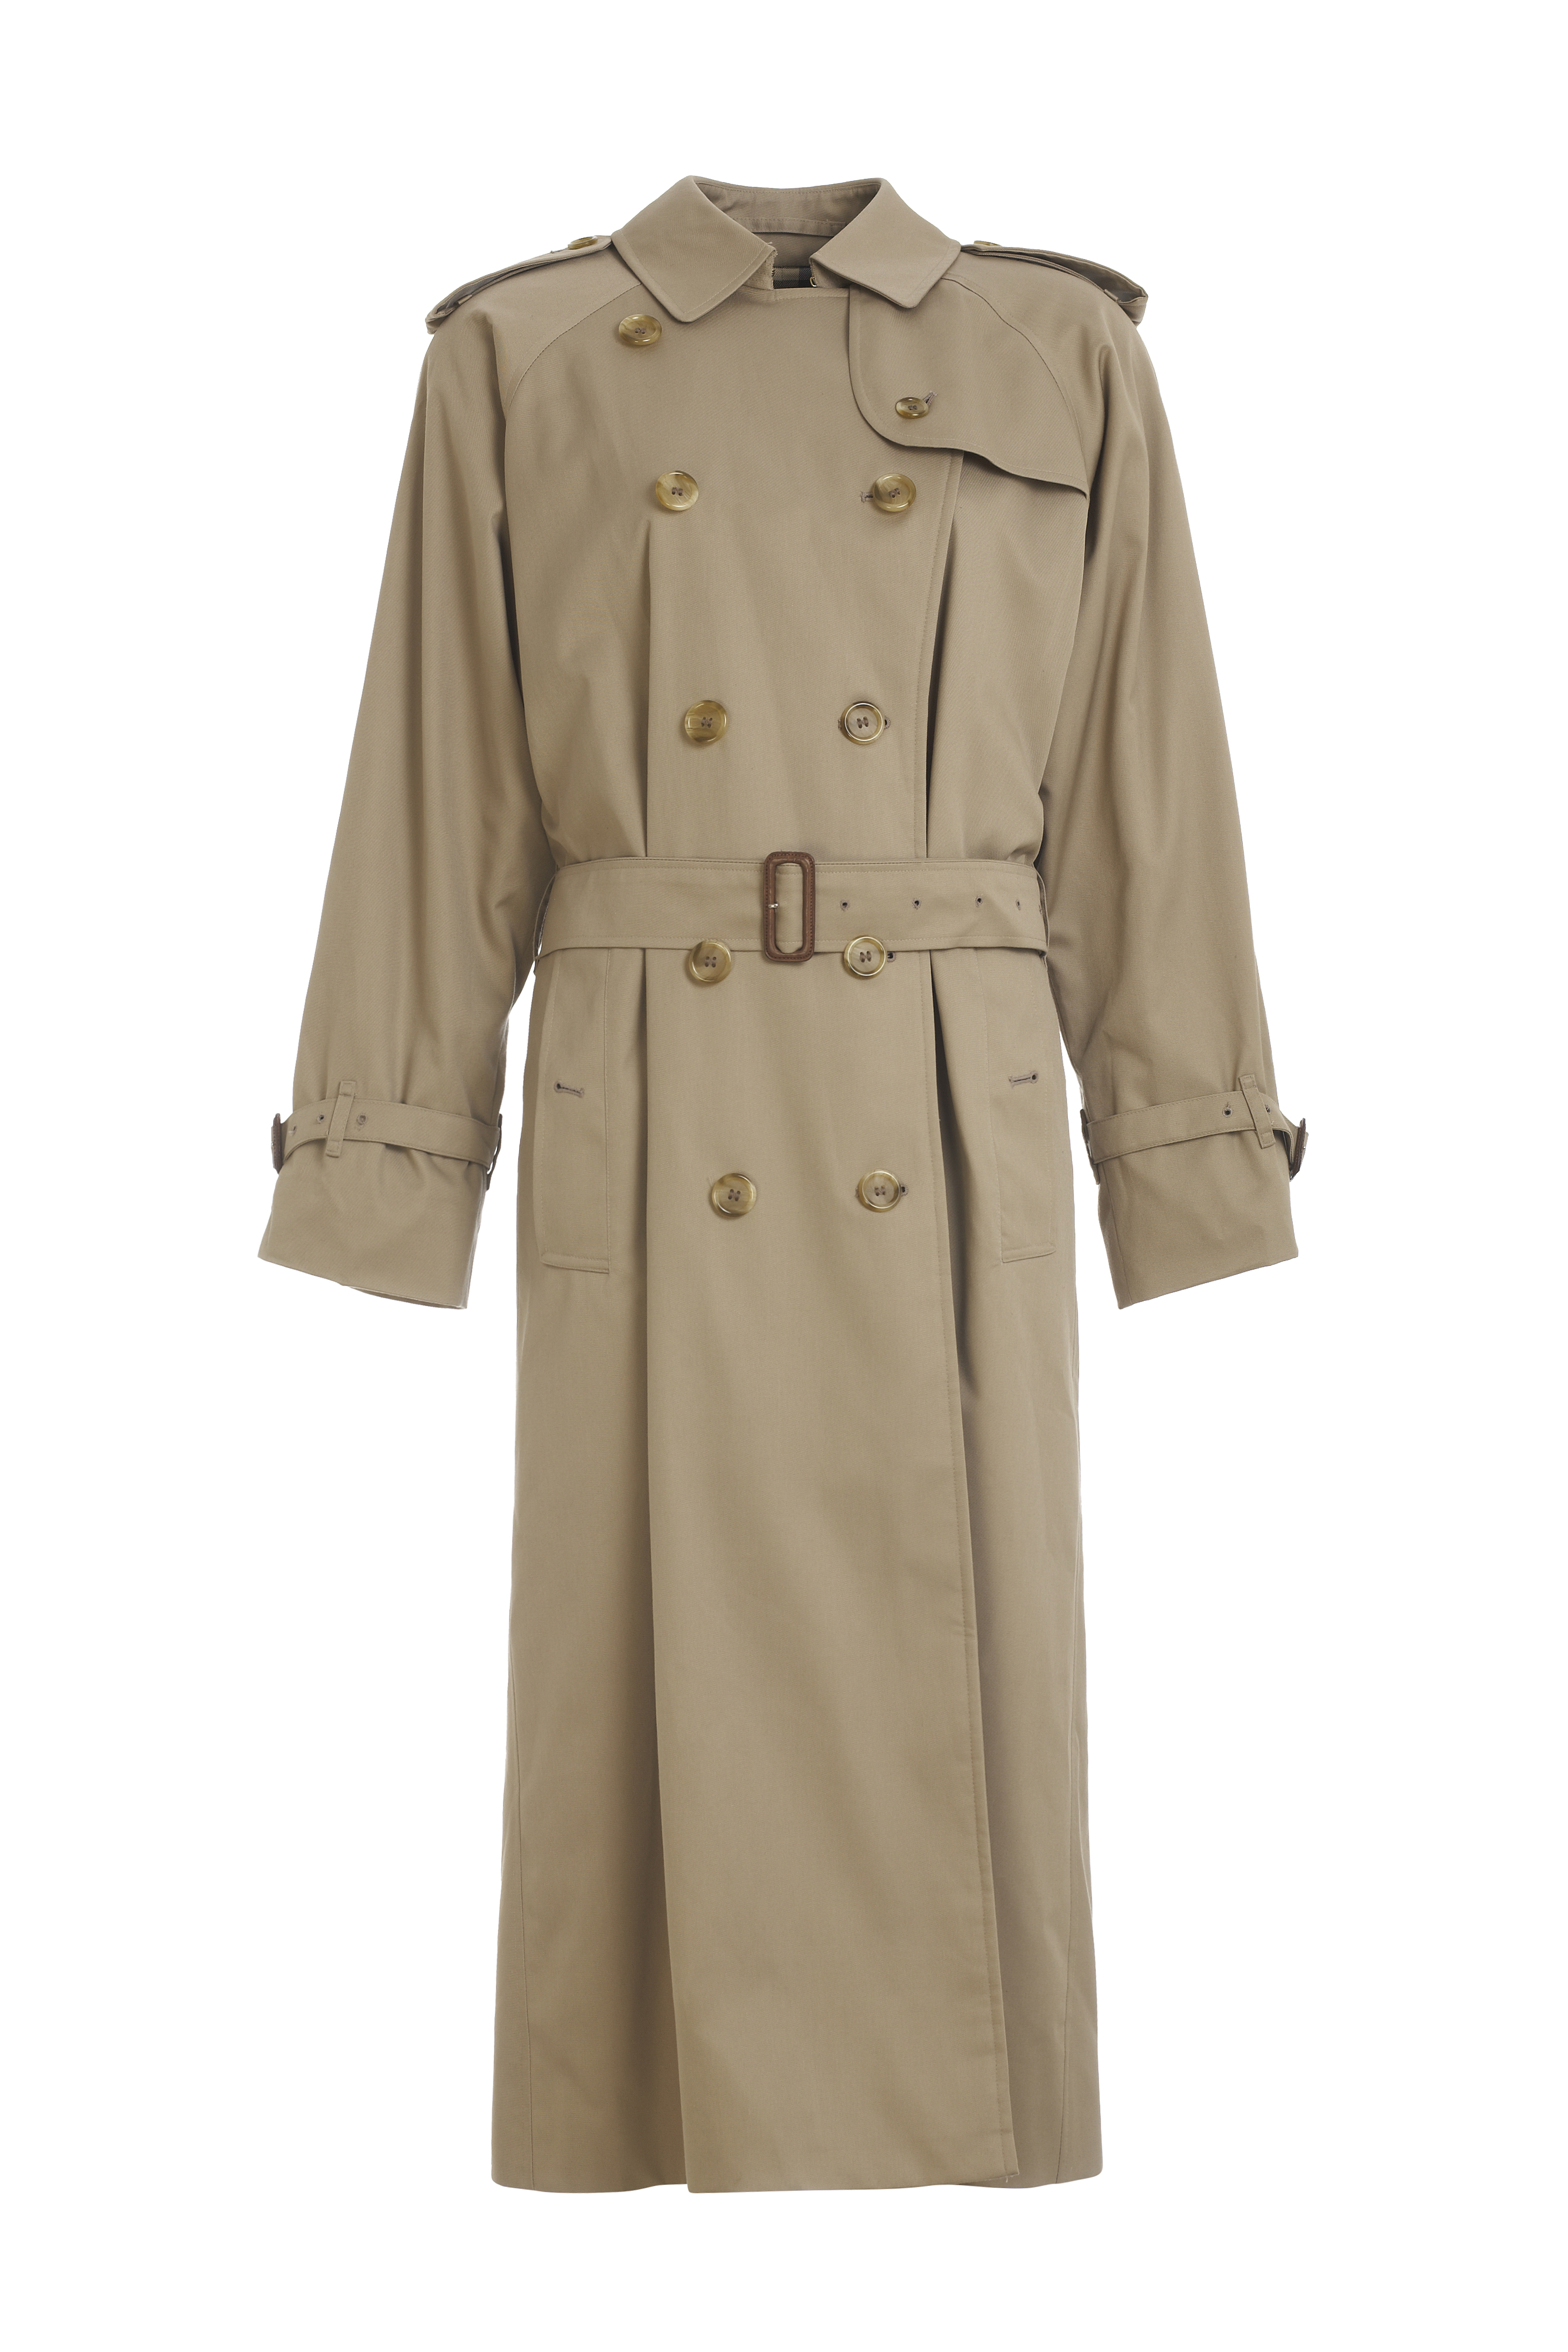 Burberry taupe trench coat | Curate8